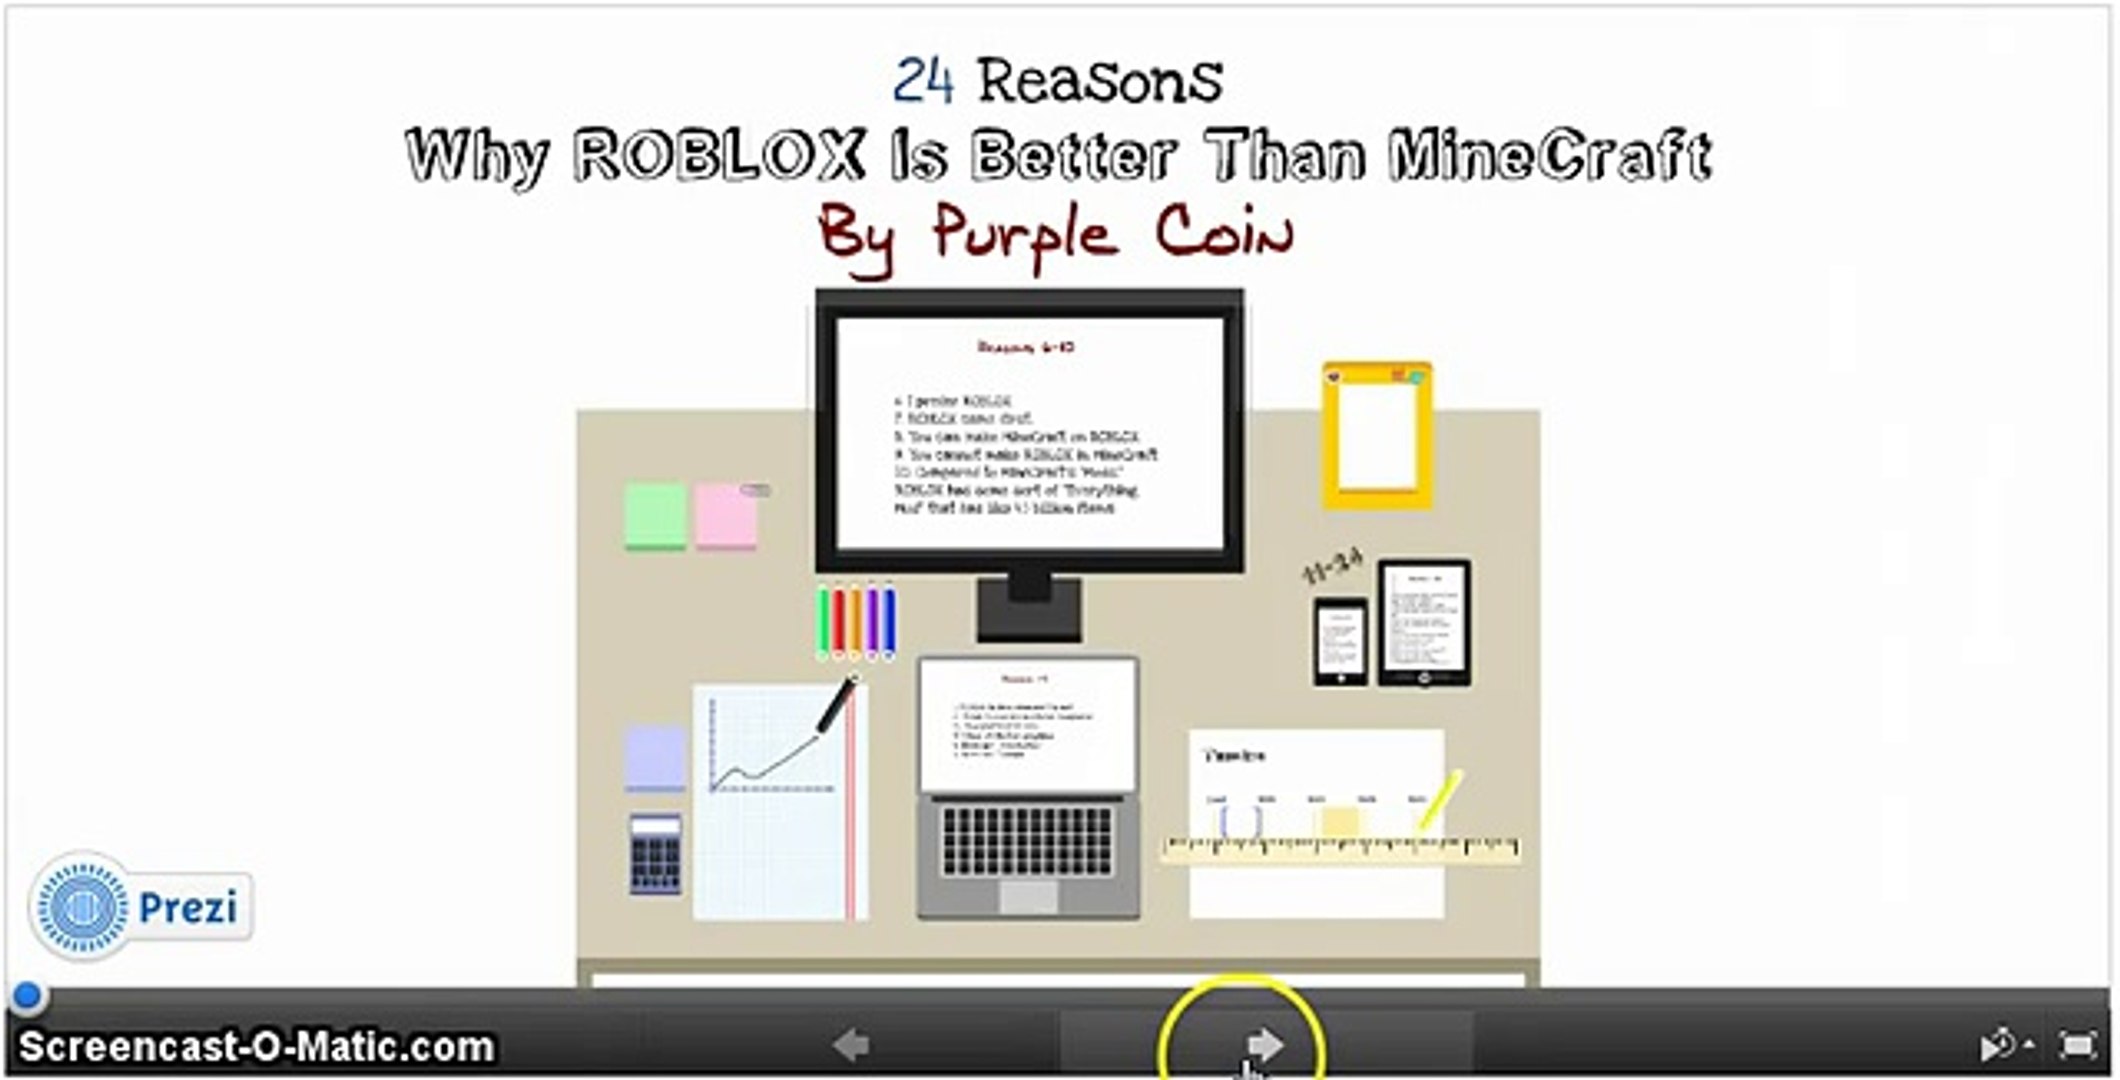 24 Reasons Why Roblox Is Better Than Minecraft My 1 Video - roblox is better than minecraft video dailymotion